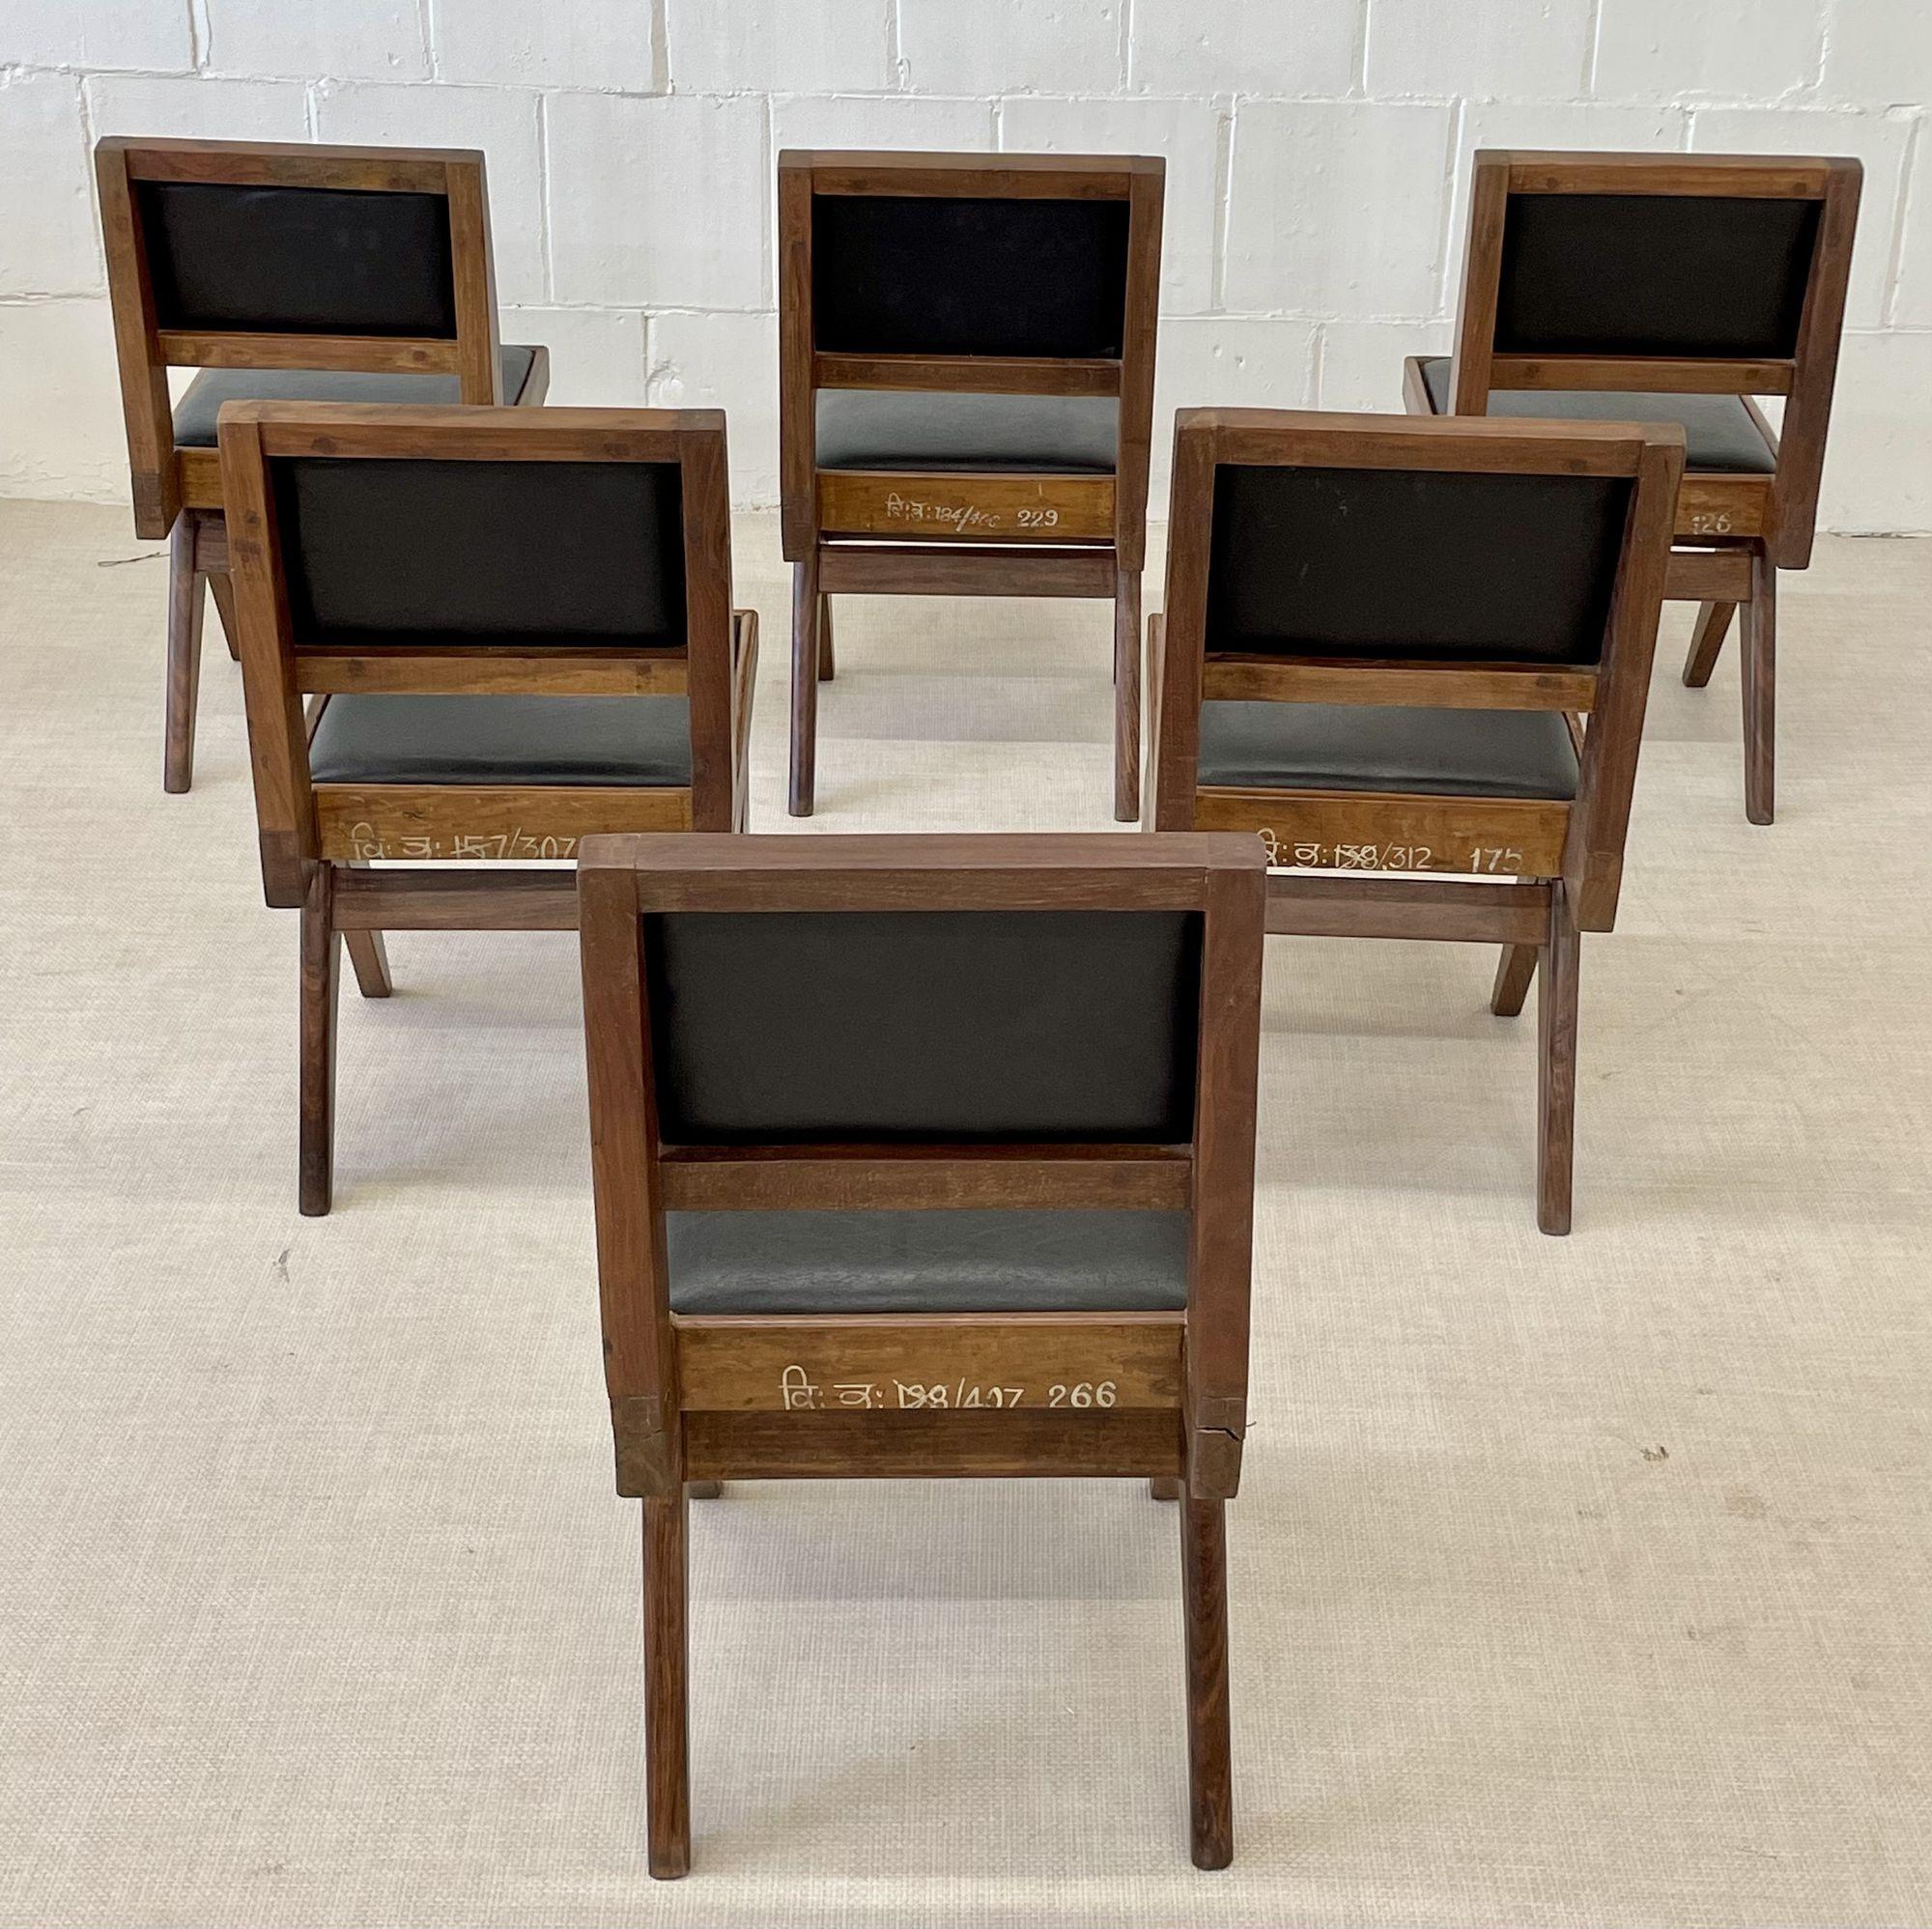 Pierre Jeanneret, French Mid-Century Modern, Six Dining Chairs, Teak, Chandigarh For Sale 10